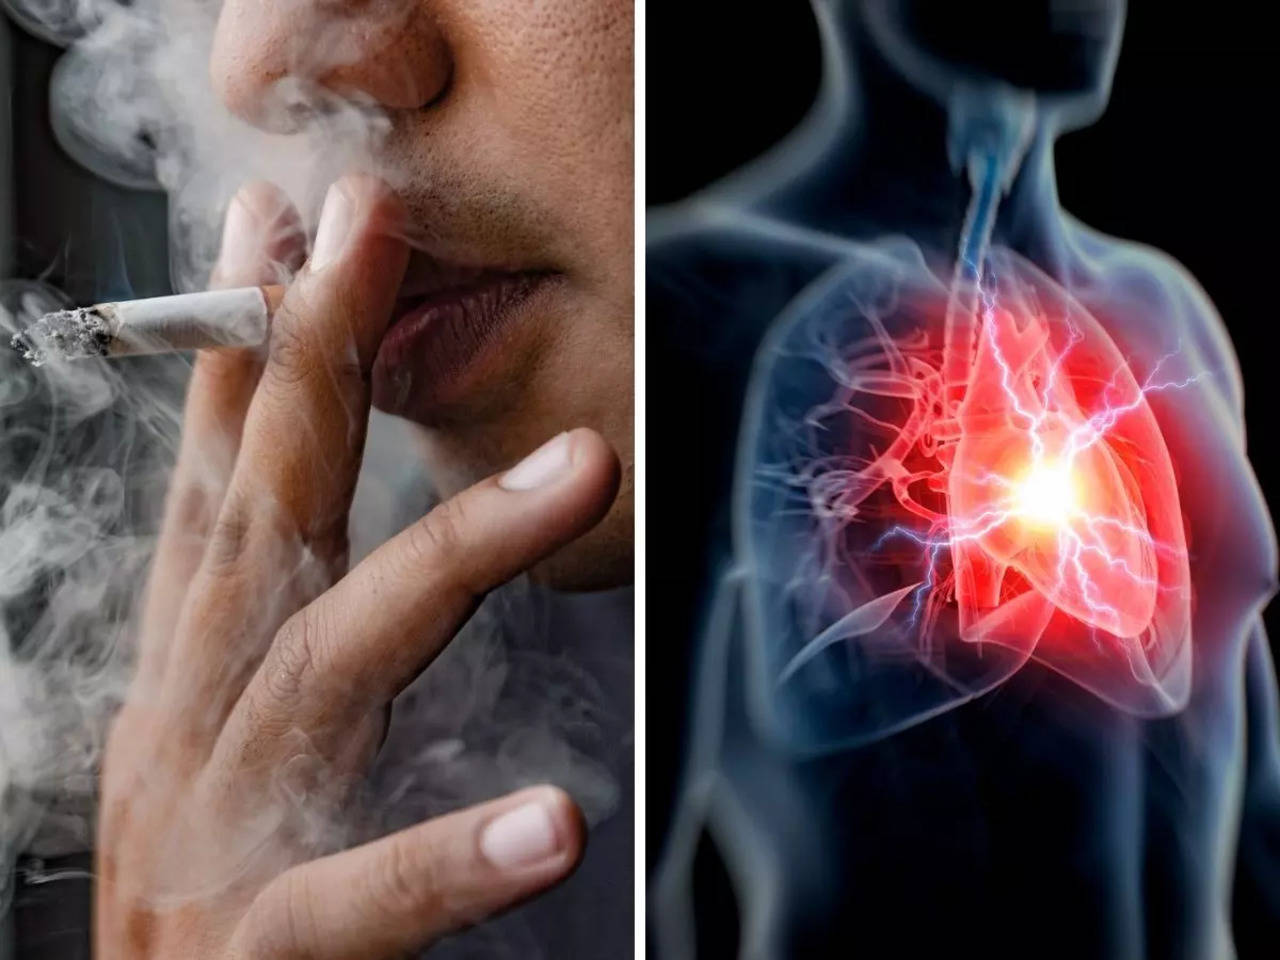 Heart beat fast after smoking: Causes and more